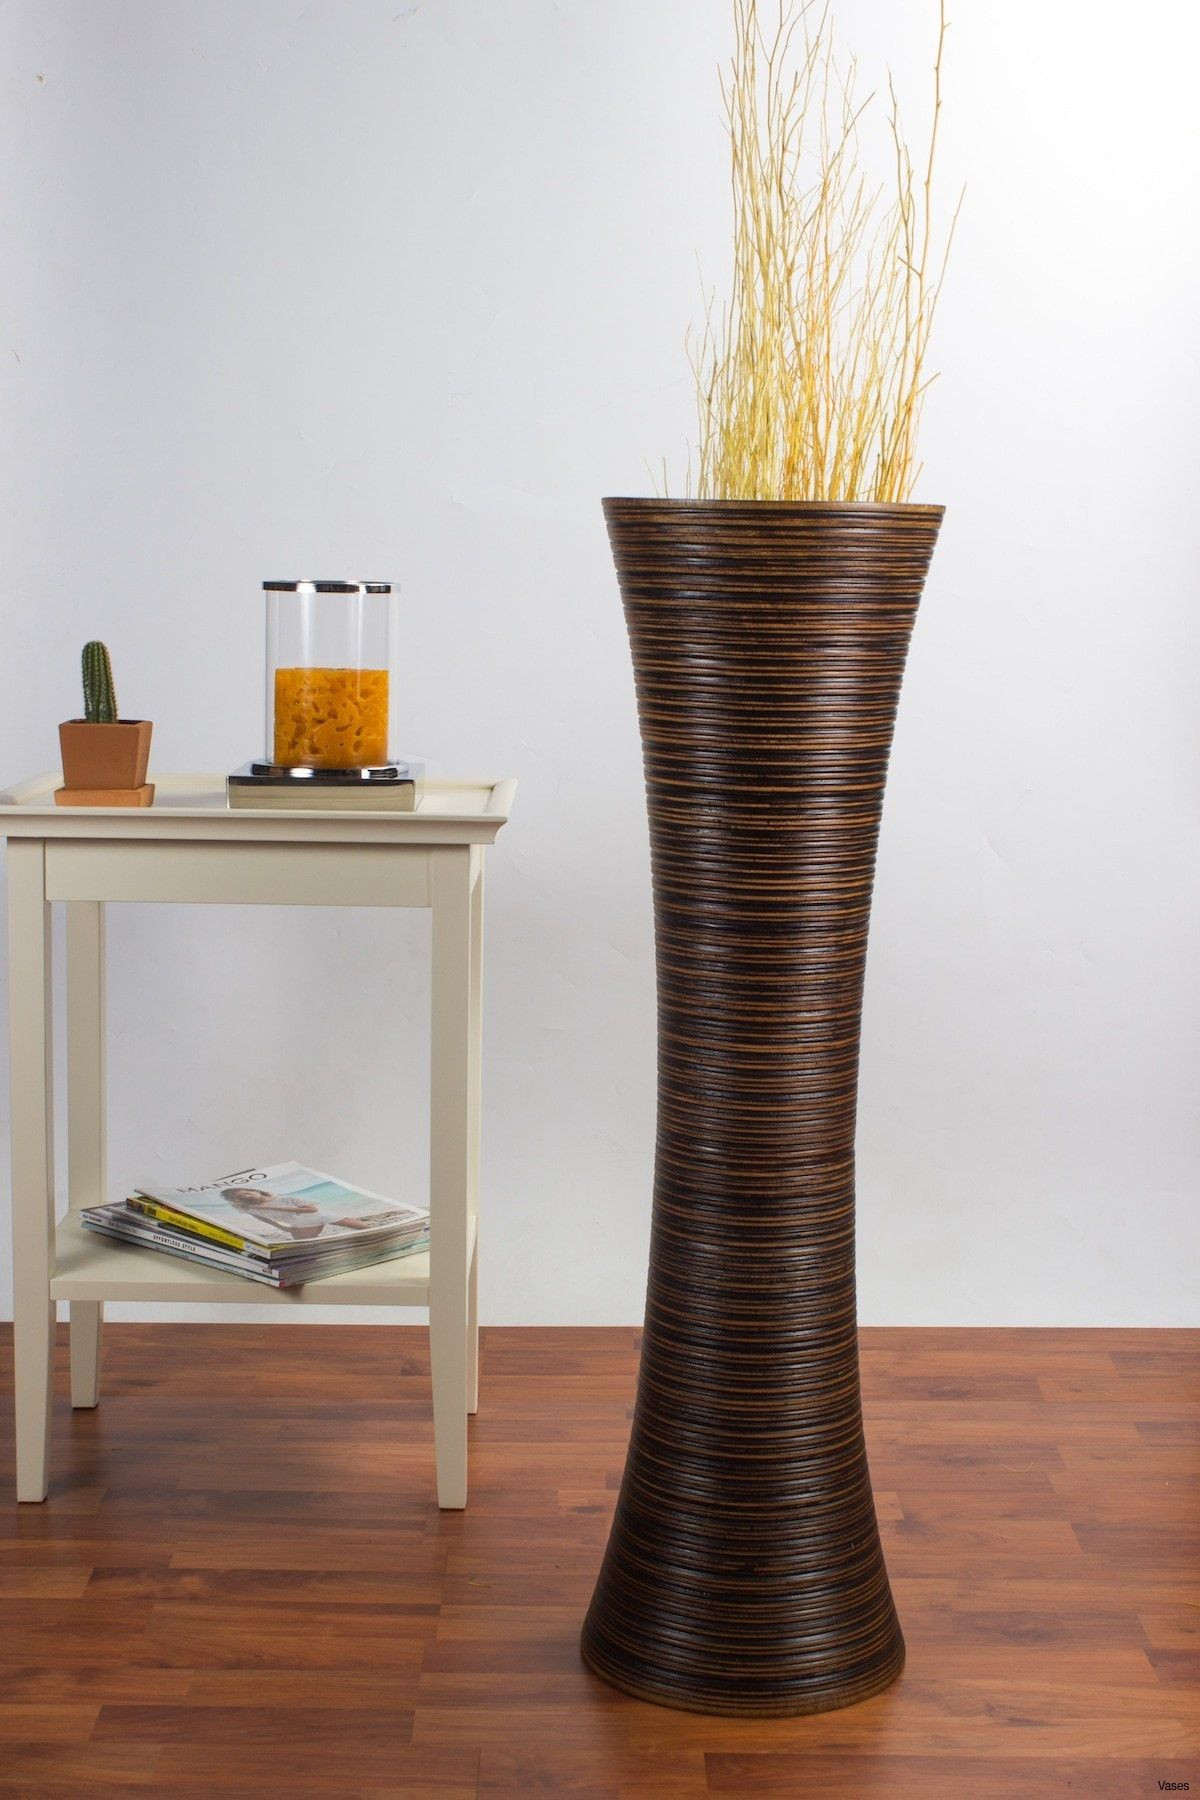 30 attractive House Plant Vase 2024 free download house plant vase of 30 large floor vase the weekly world with decorative floor vases fresh d dkbrw 5749 1h vases tall brown i 0d